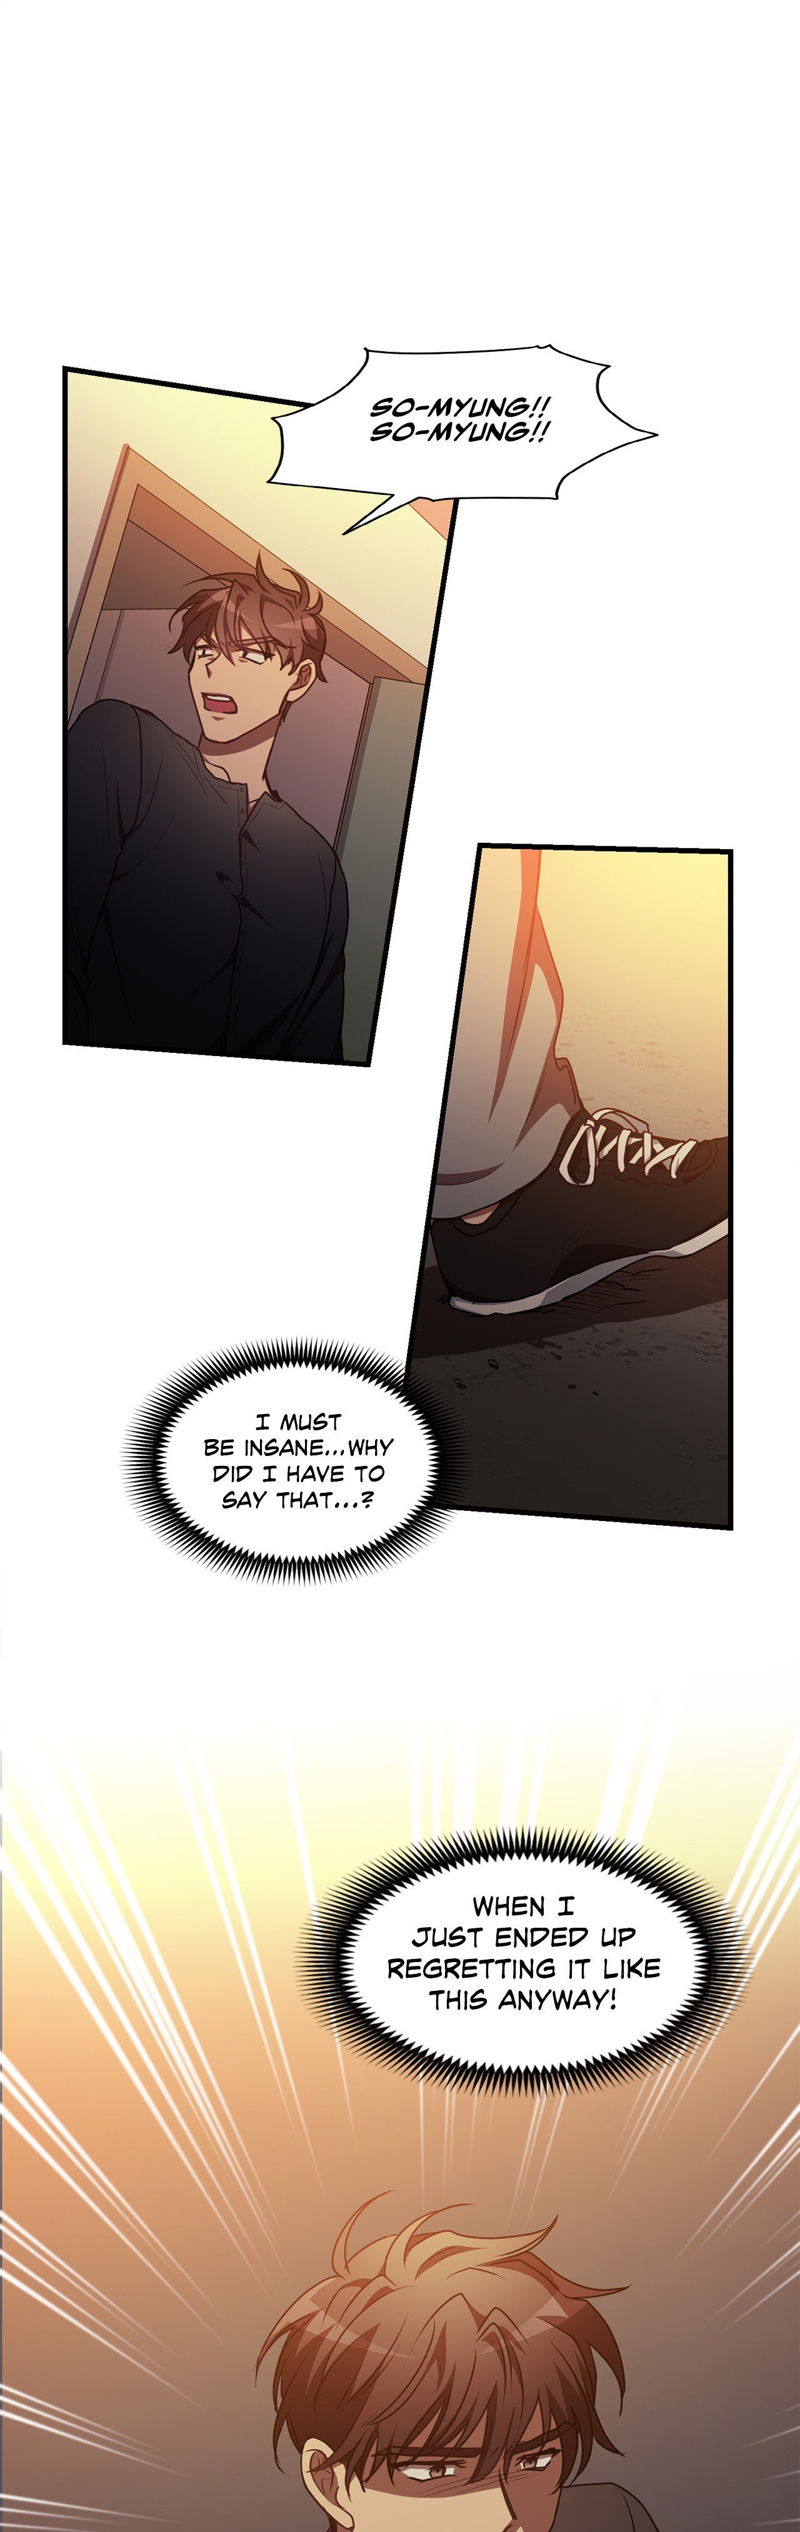 Black Dragon's Lover Chapter 66 page 7